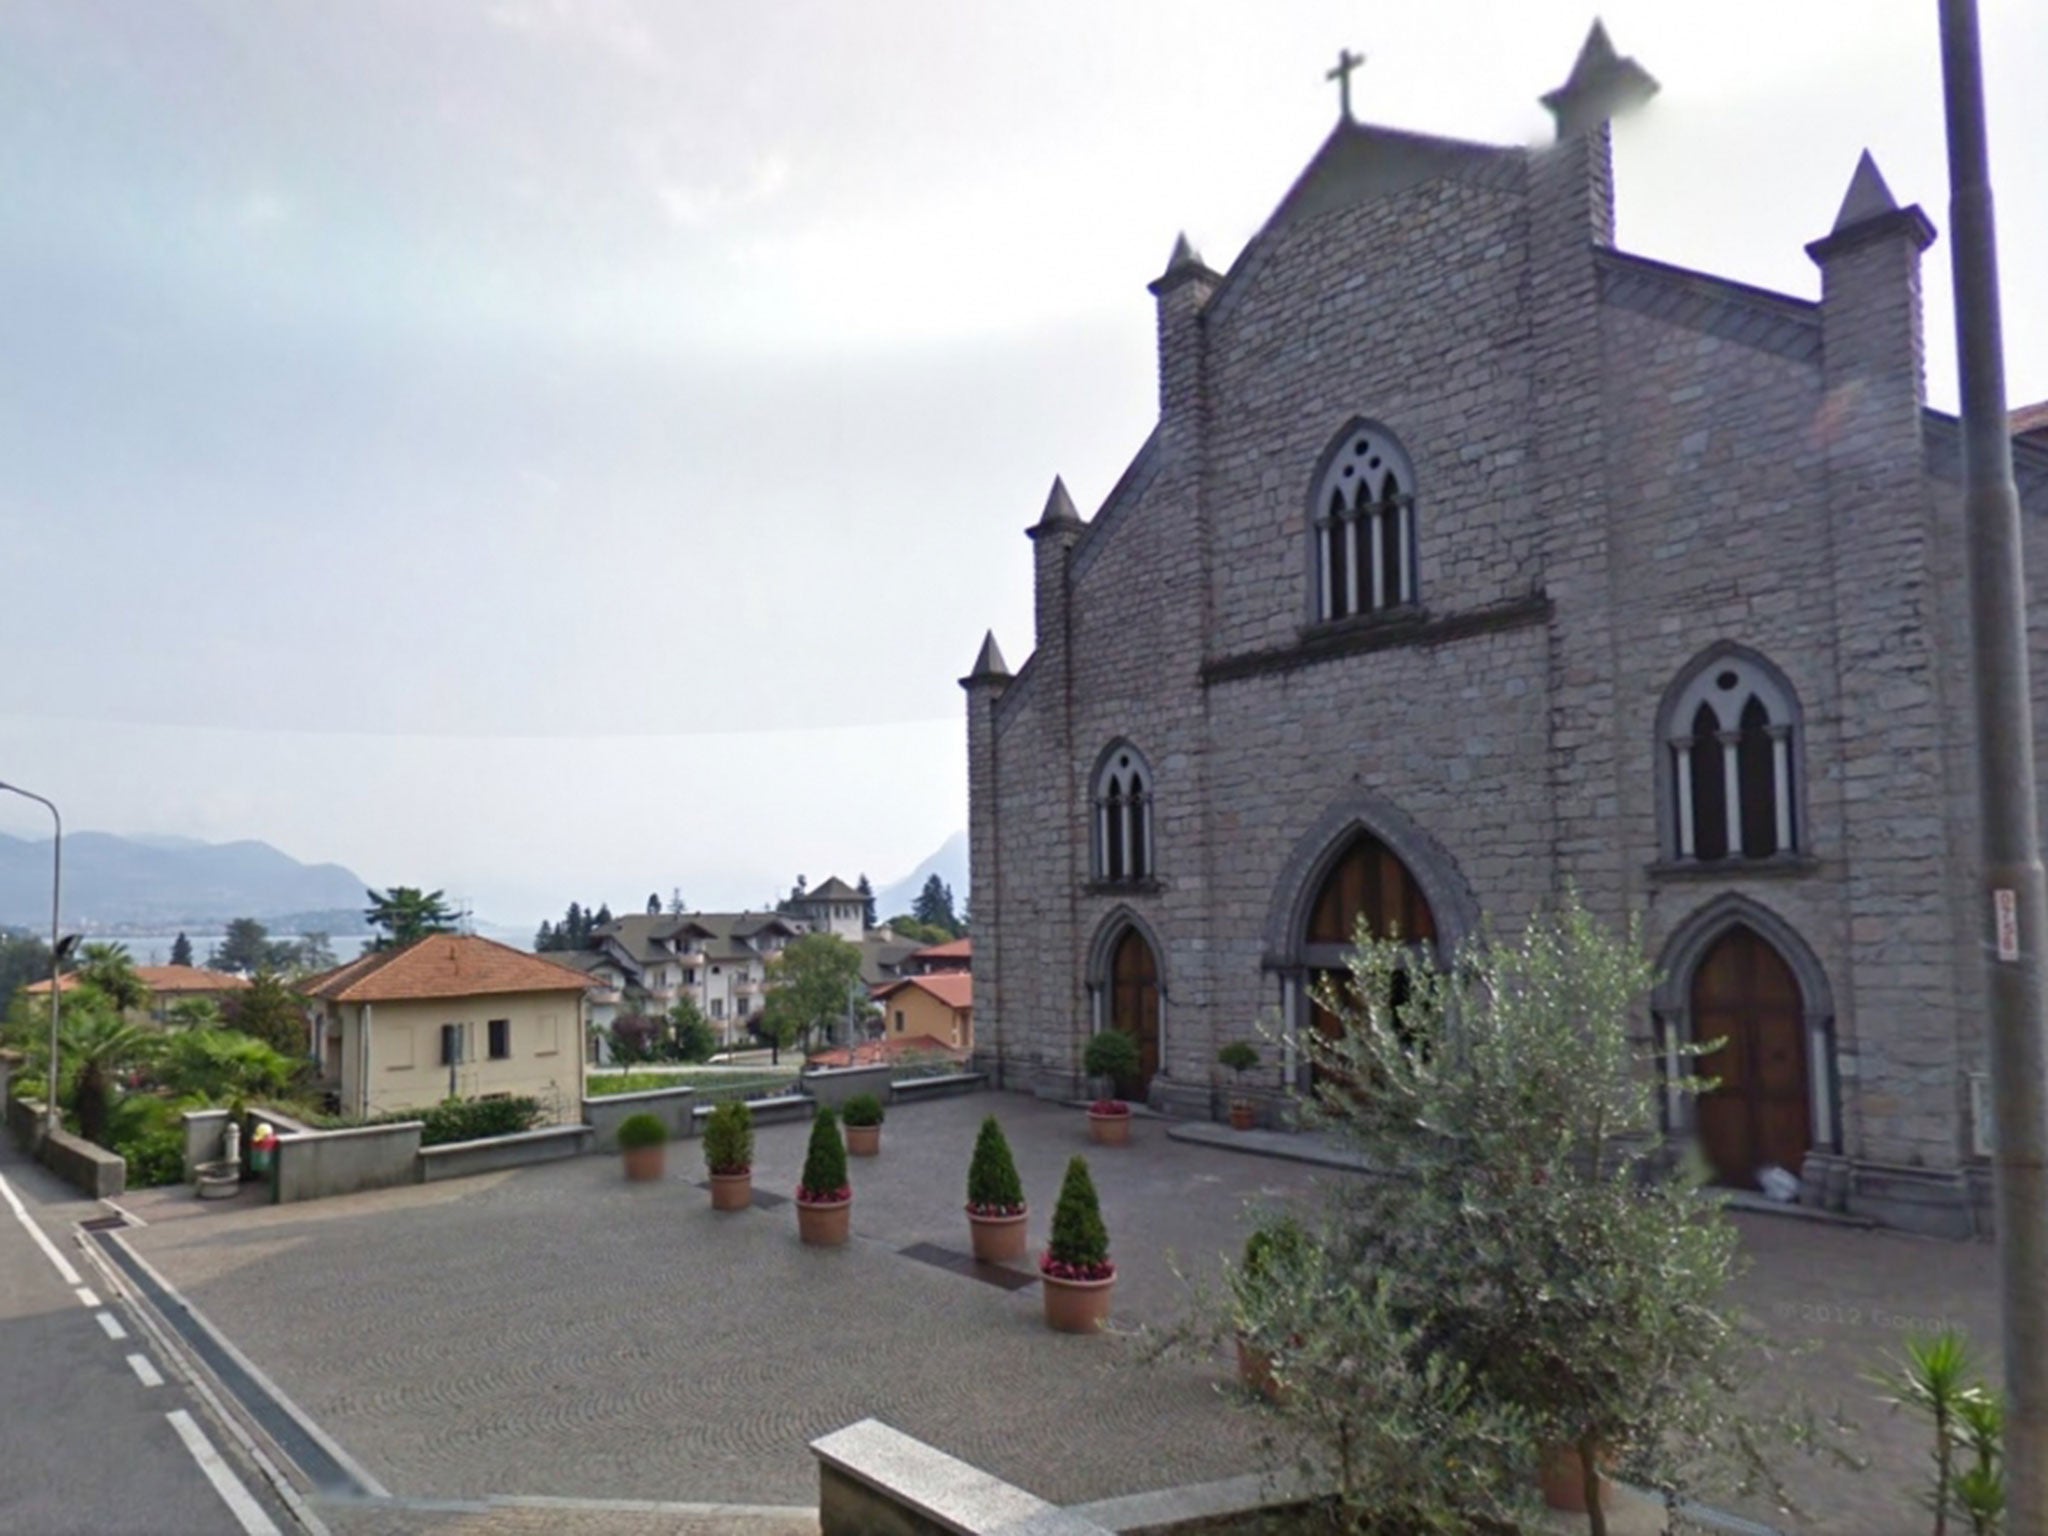 The Church where Father Cavaletti worked before being arrested